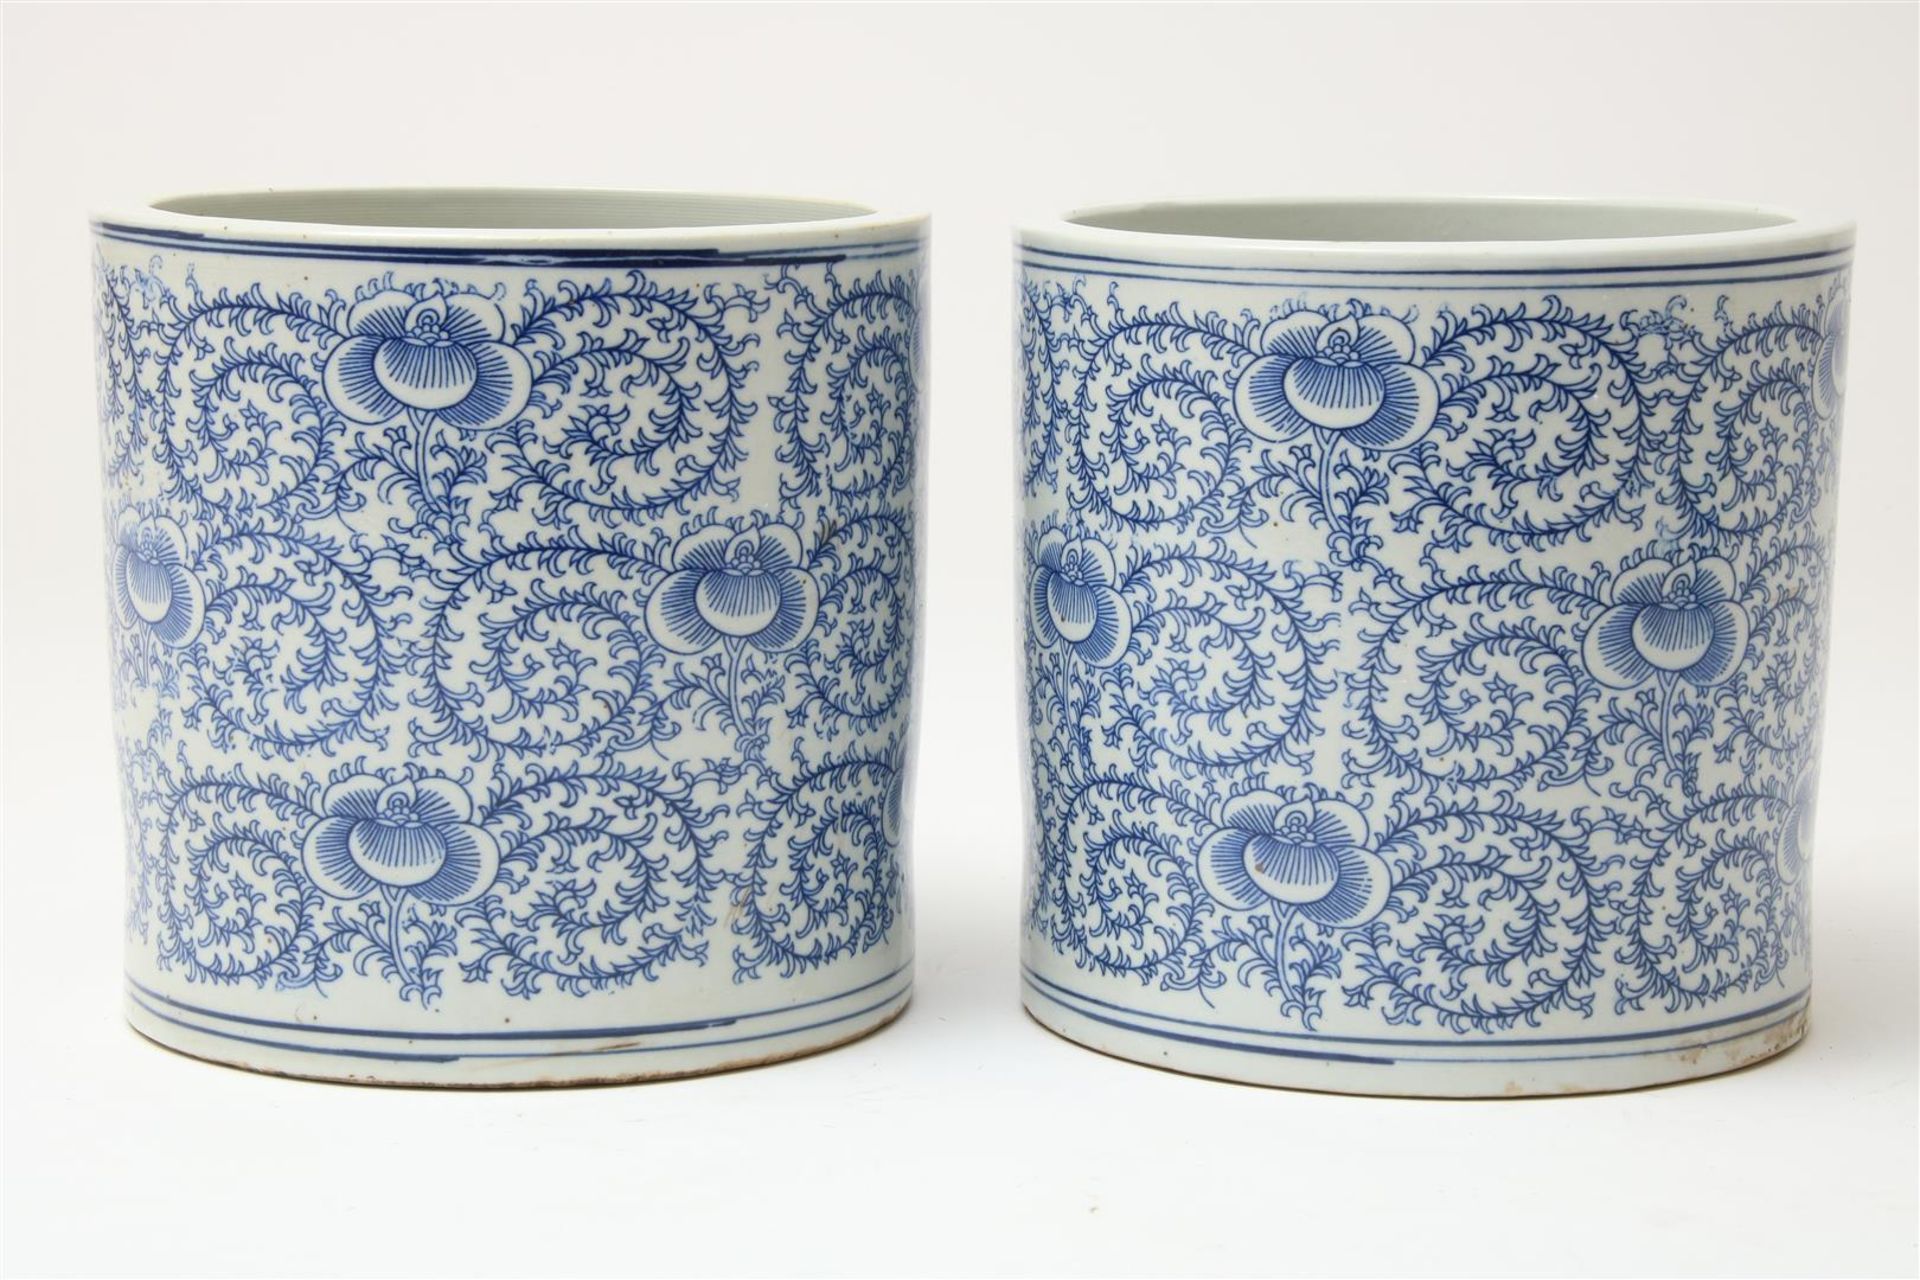 Set of blue and white porcelain pots decorated with flowers, China 20th century, h. 20 dia. 20.5